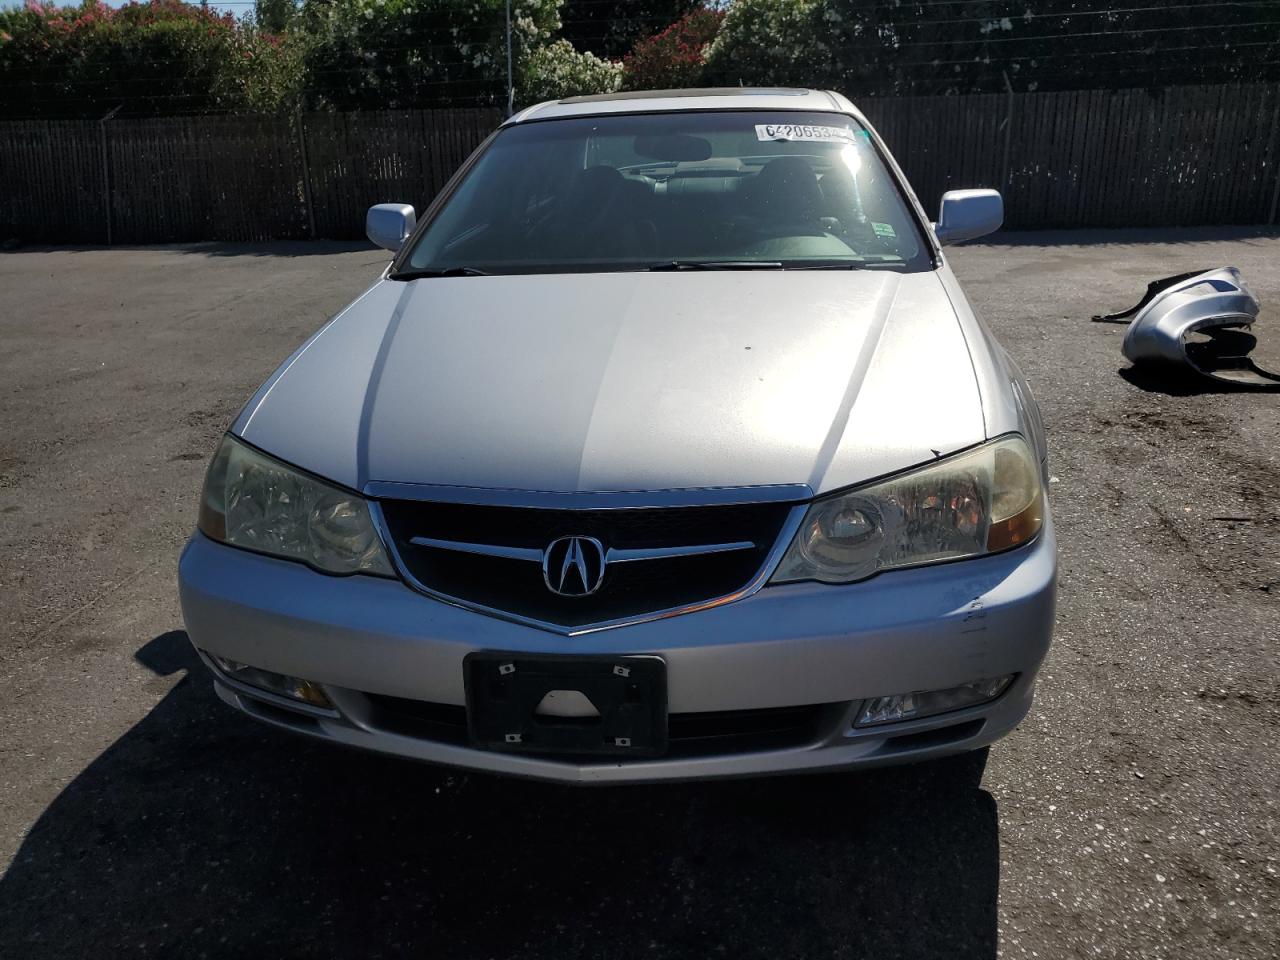 2002 Acura 3.2Tl Type-S VIN: 19UUA56992A038066 Lot: 64206534